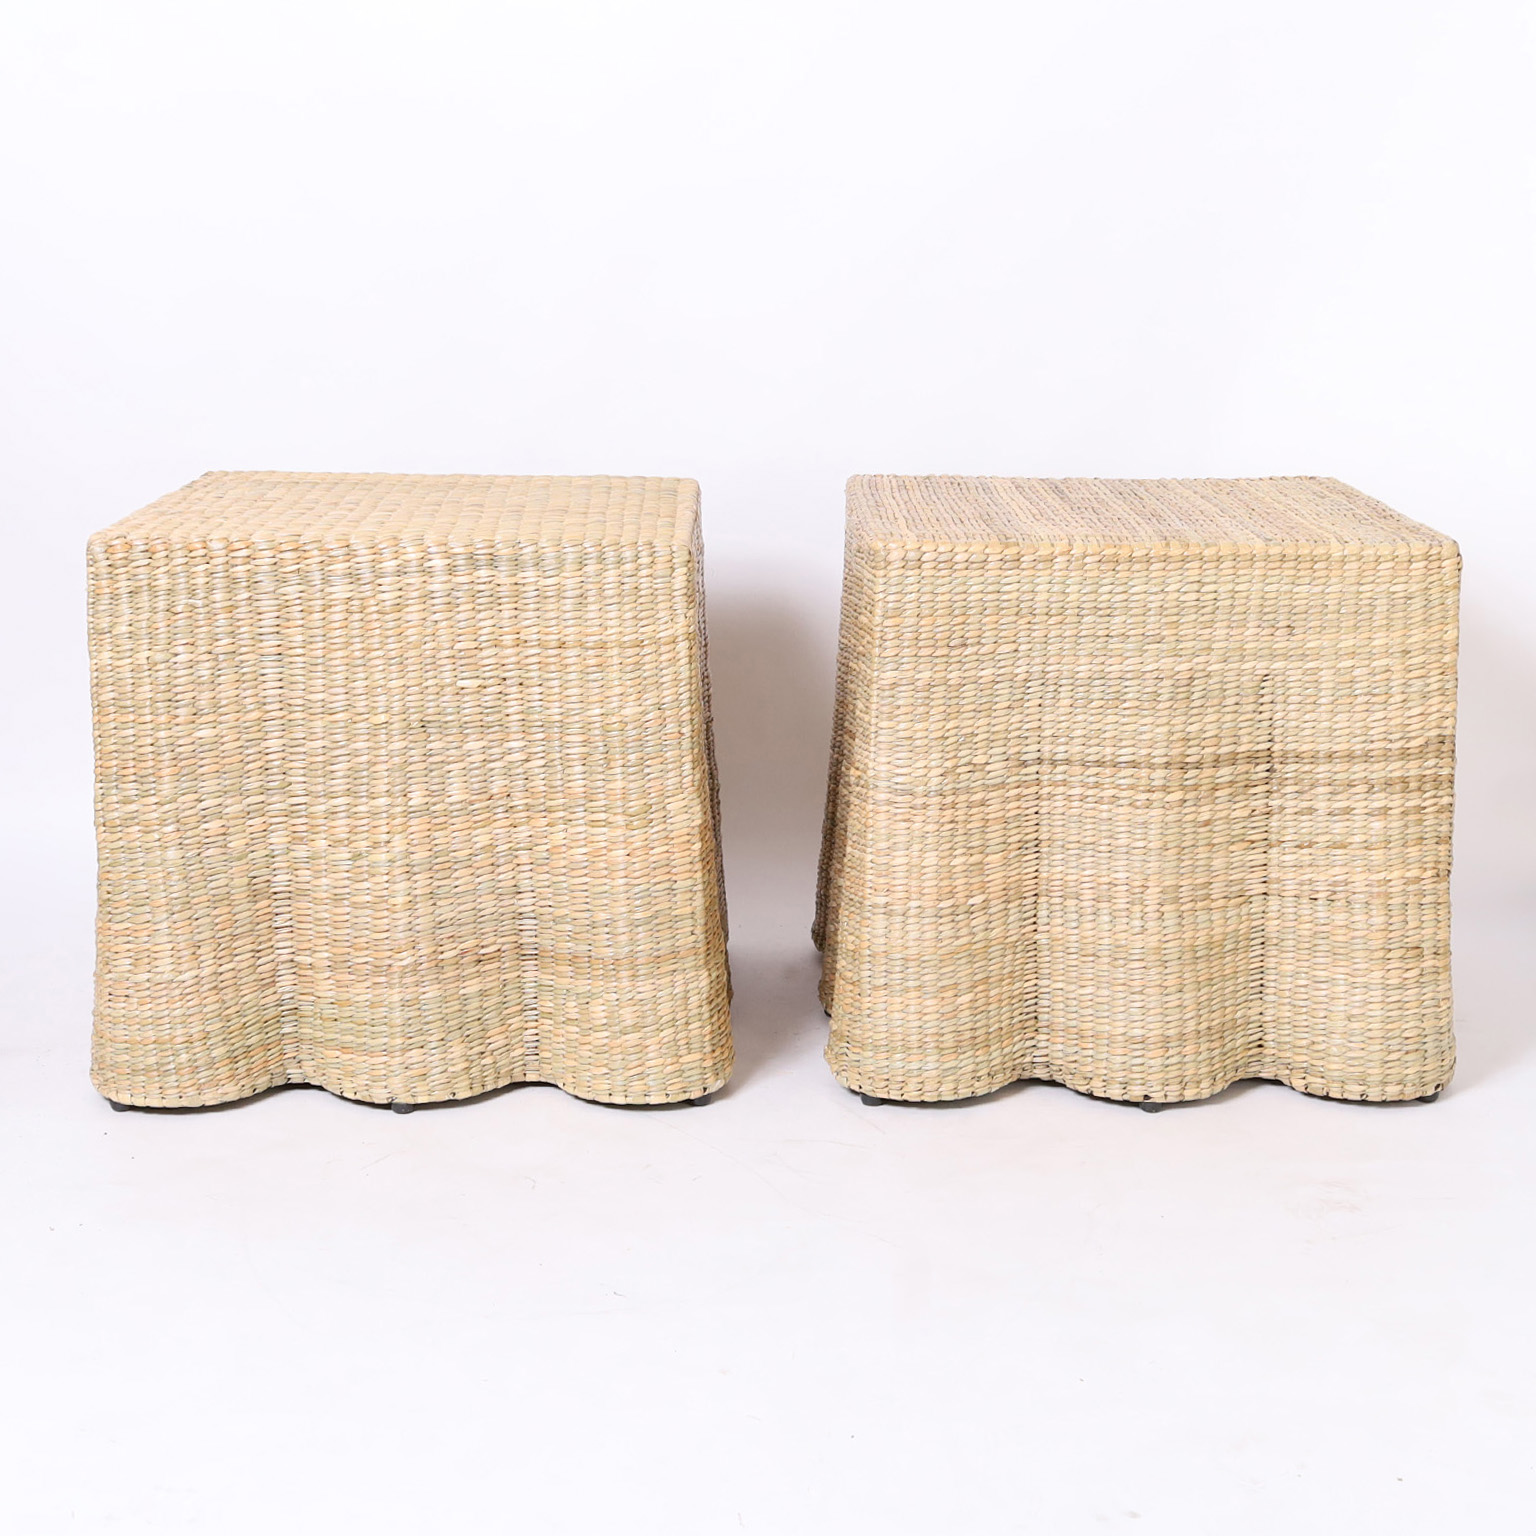 The Vivienne Pair of Woven Reed Square Ghost Drapery Stands from the FS Flores Collection